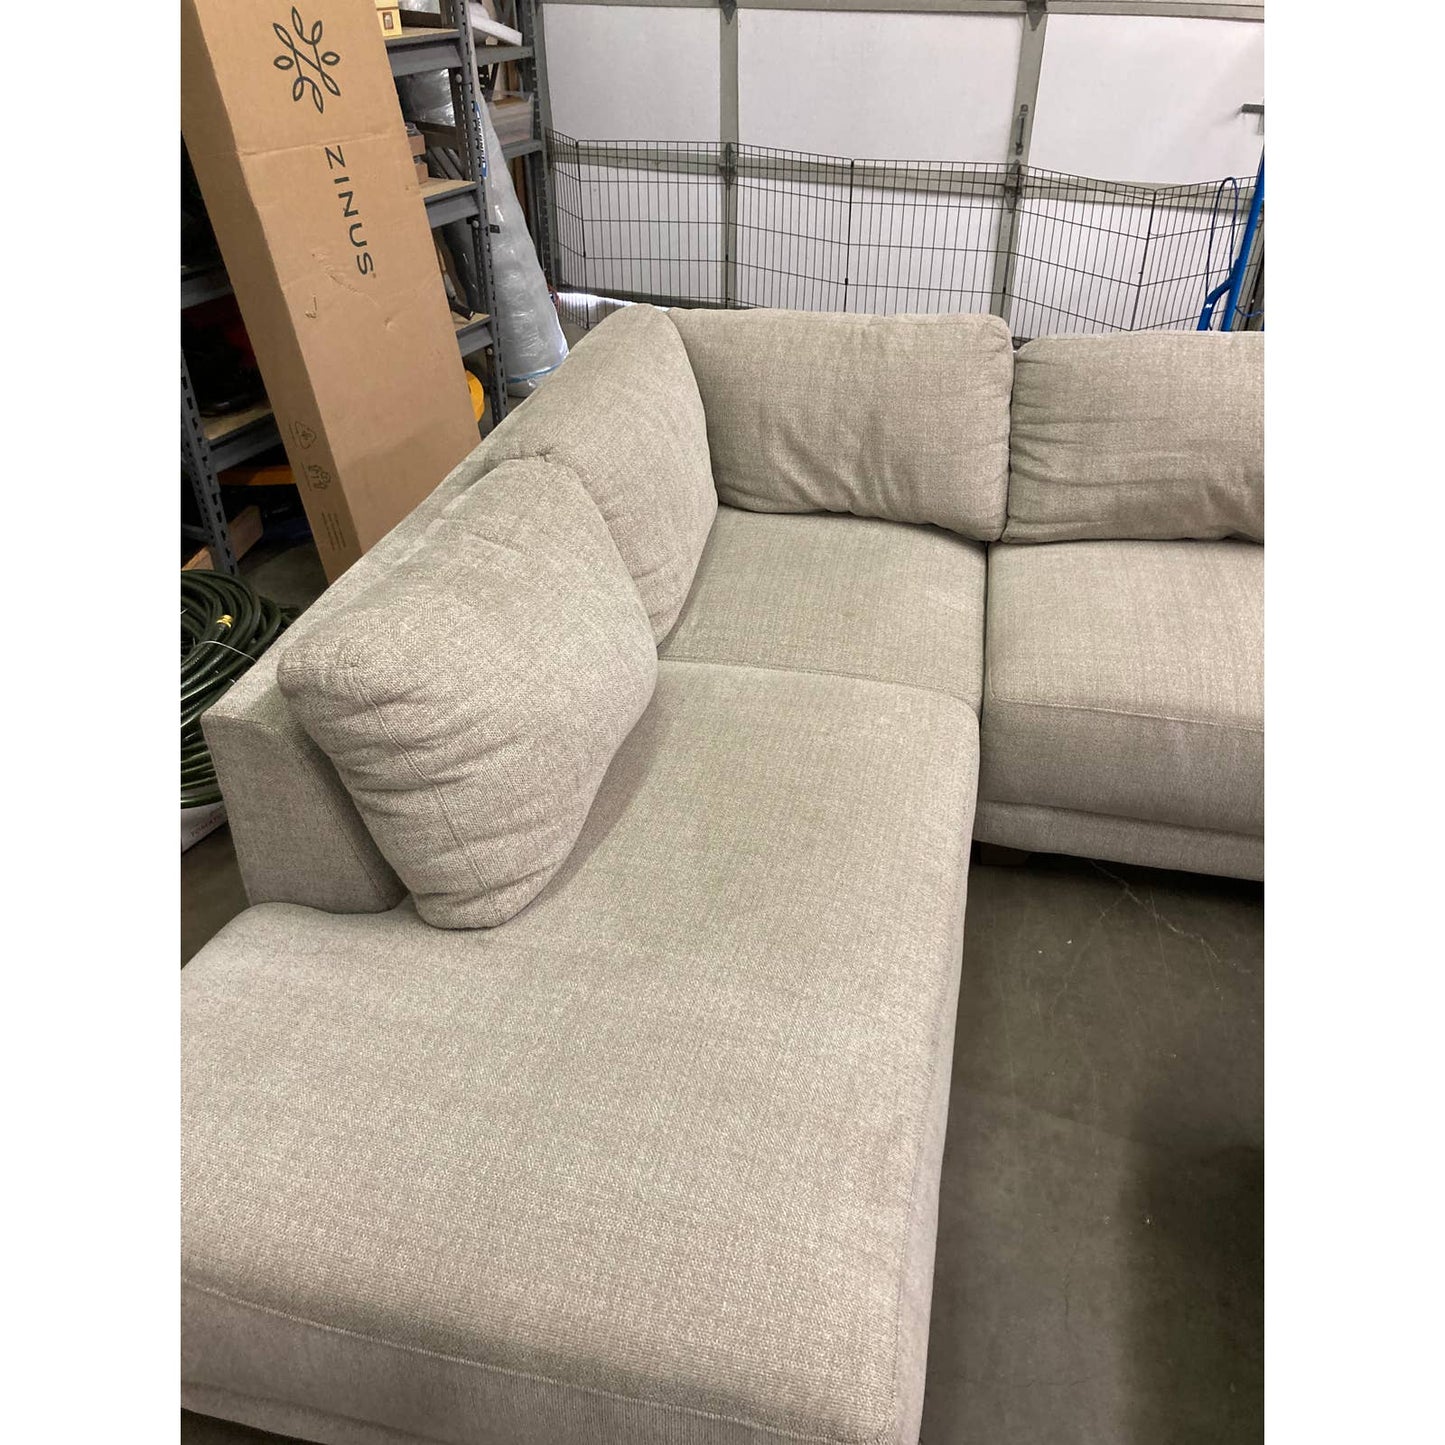 Costco - Raylin Fabric Sectional with Ottoman - Retail $1599